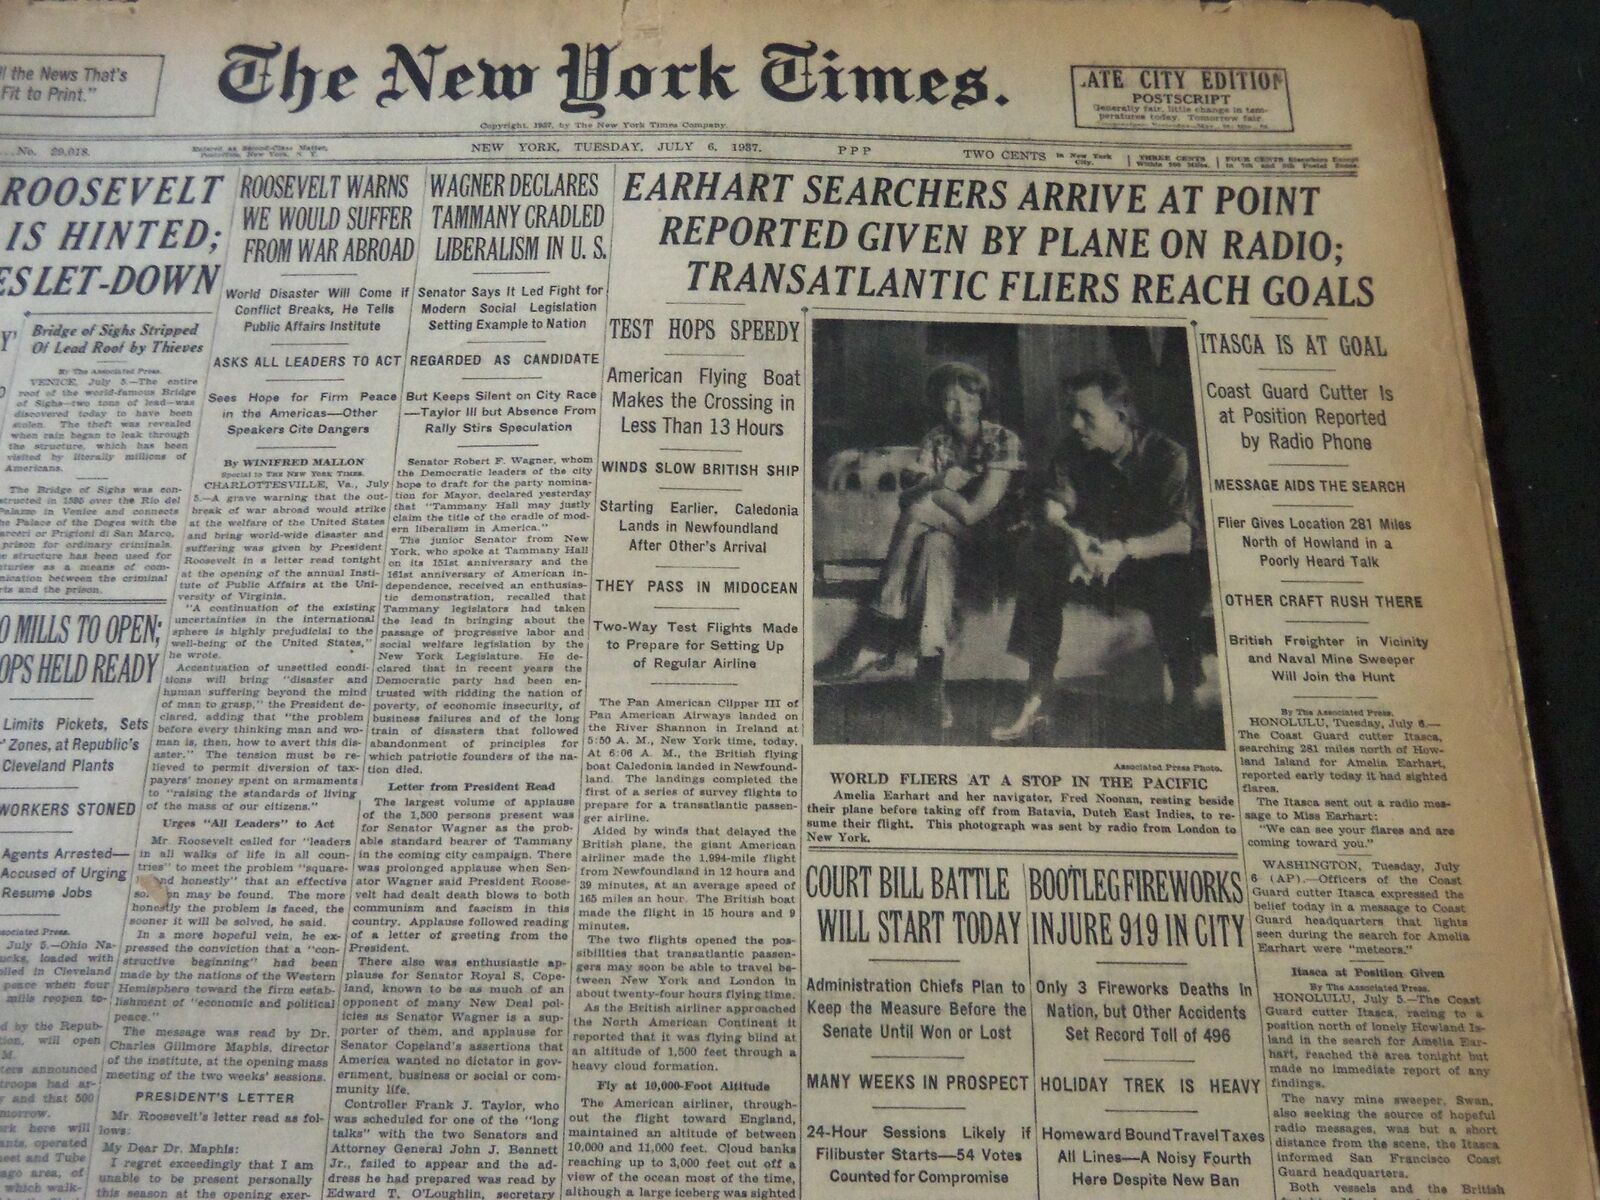 1937 JULY 6 NEW YORK TIMES - EARHRAT SEARCHES ARRIVE AT POINT - NT 5512